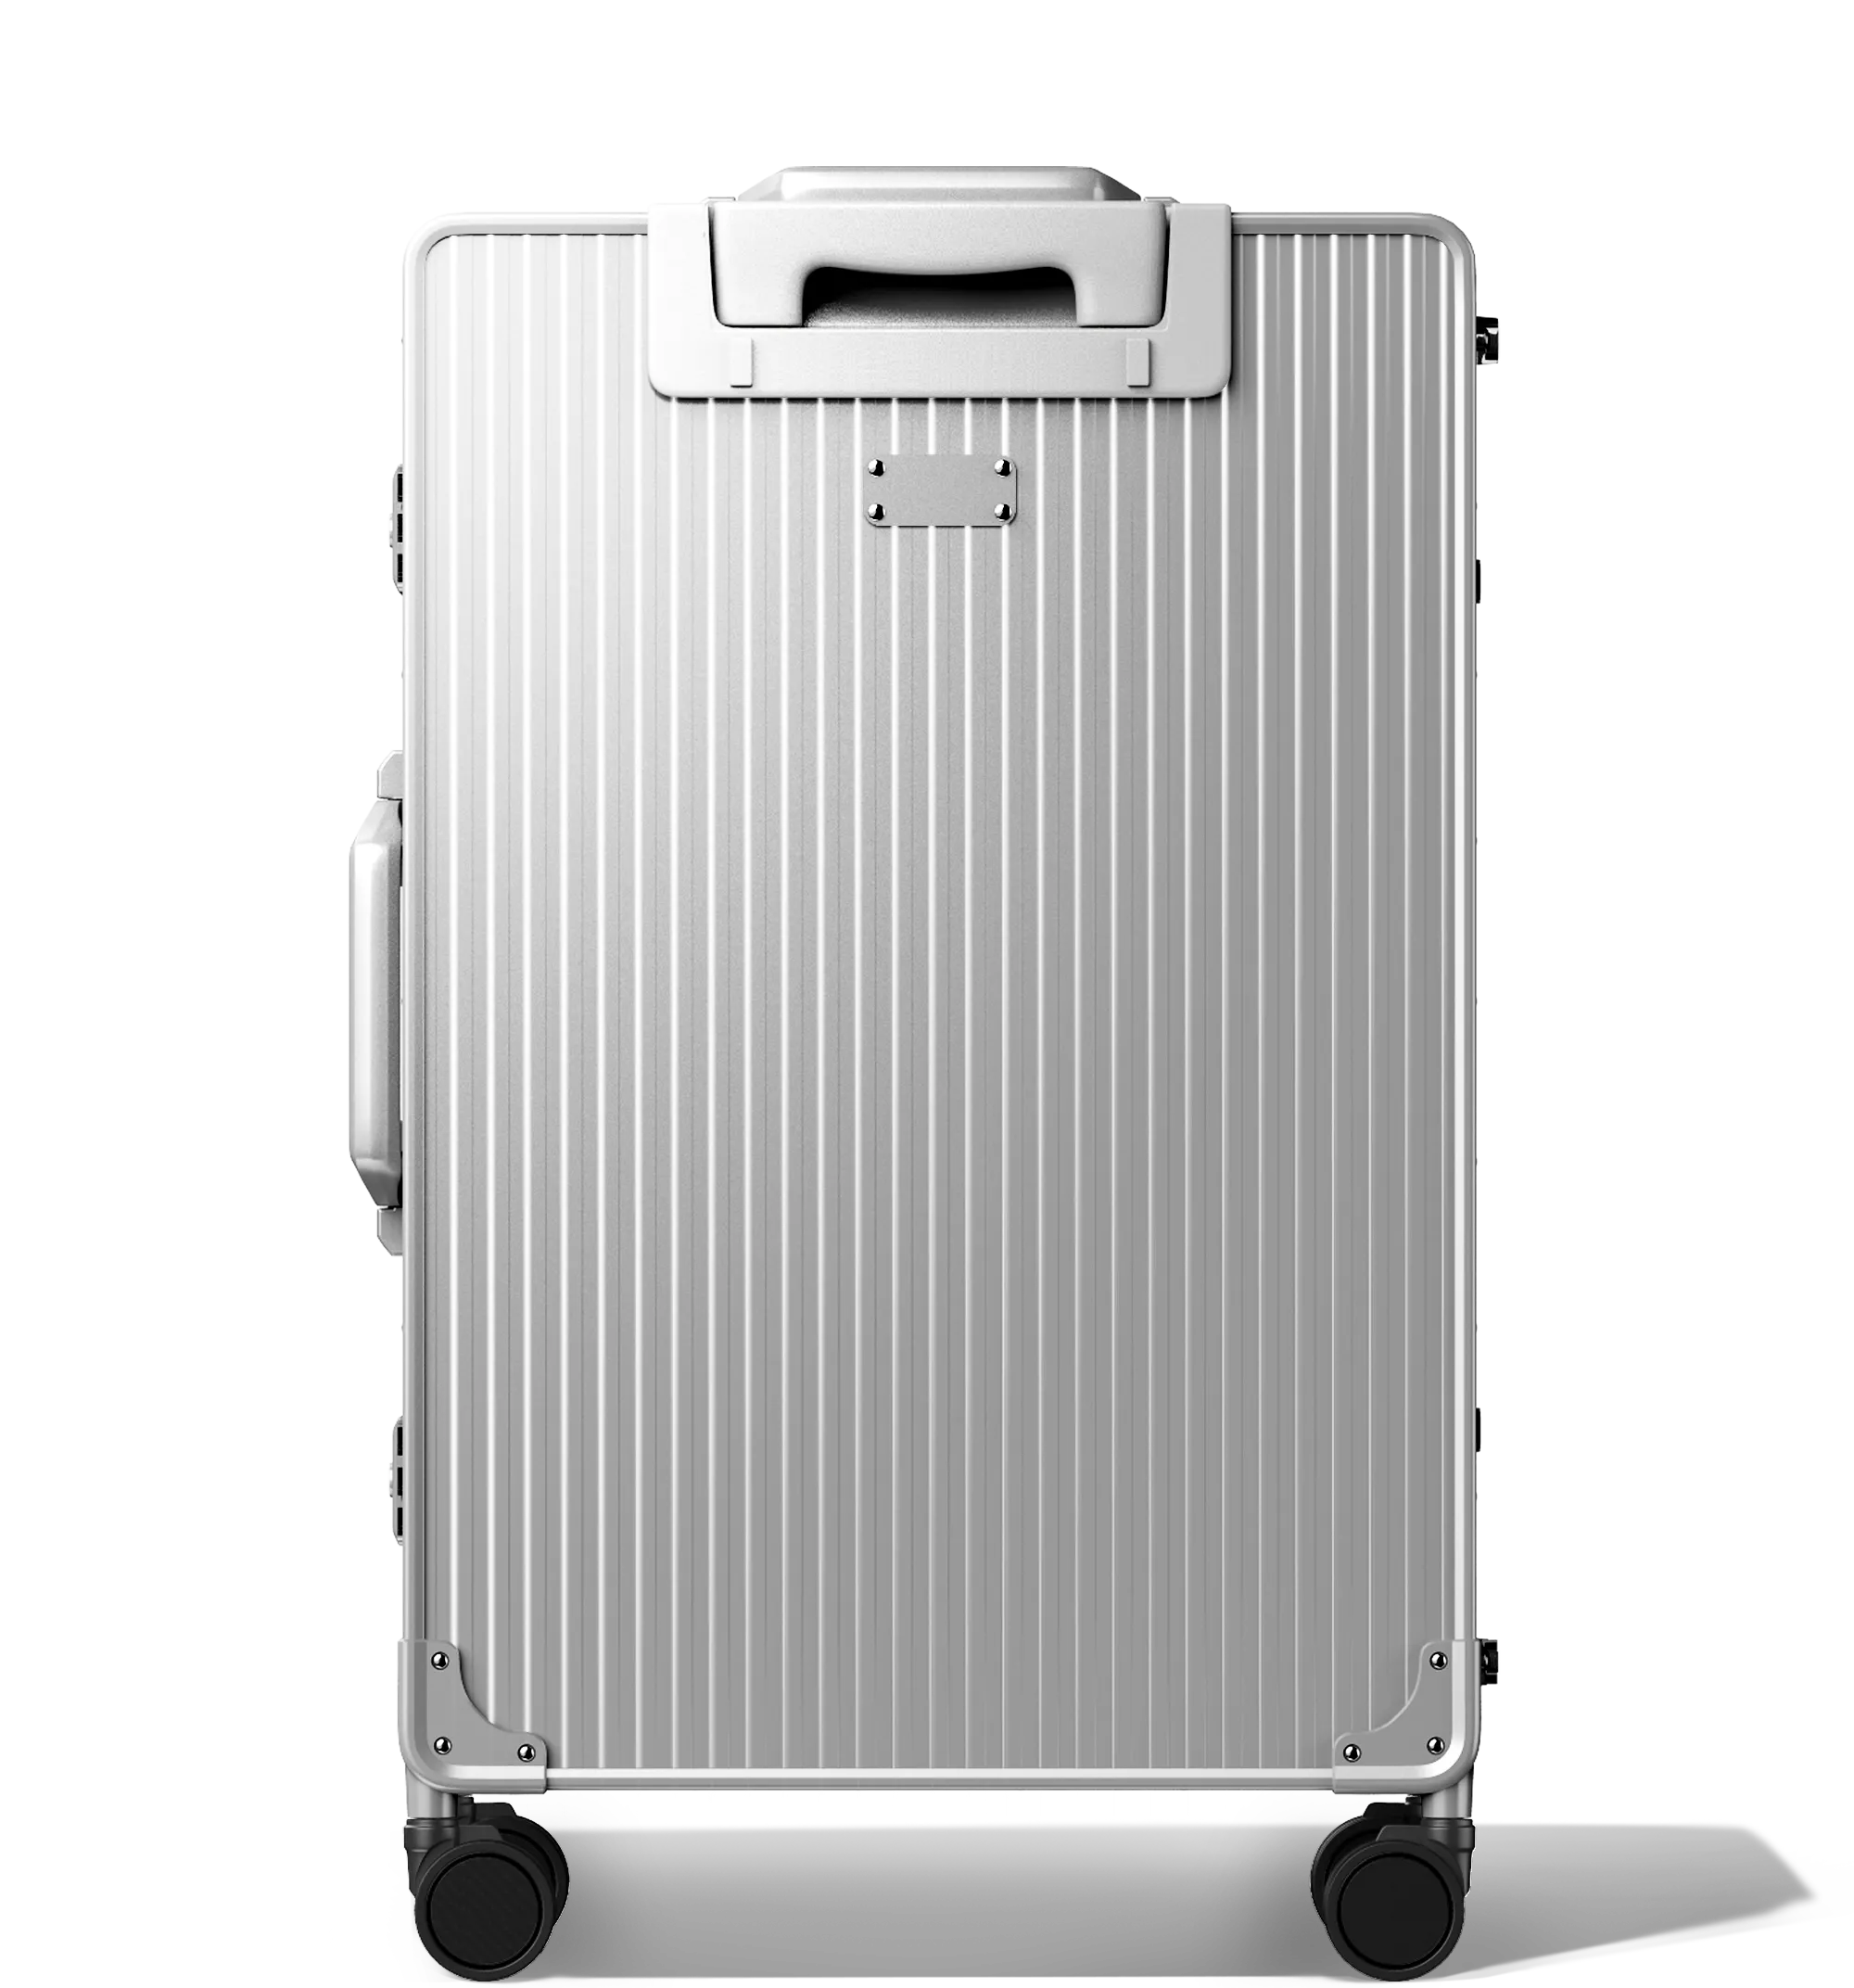 Frontal view of a Silver Check-In 65/25 , vertical hard-shell aluminium Luggage with ribbed texture, featuring a top handle, side latches, and four multi-directional spinner wheels, against a white background.